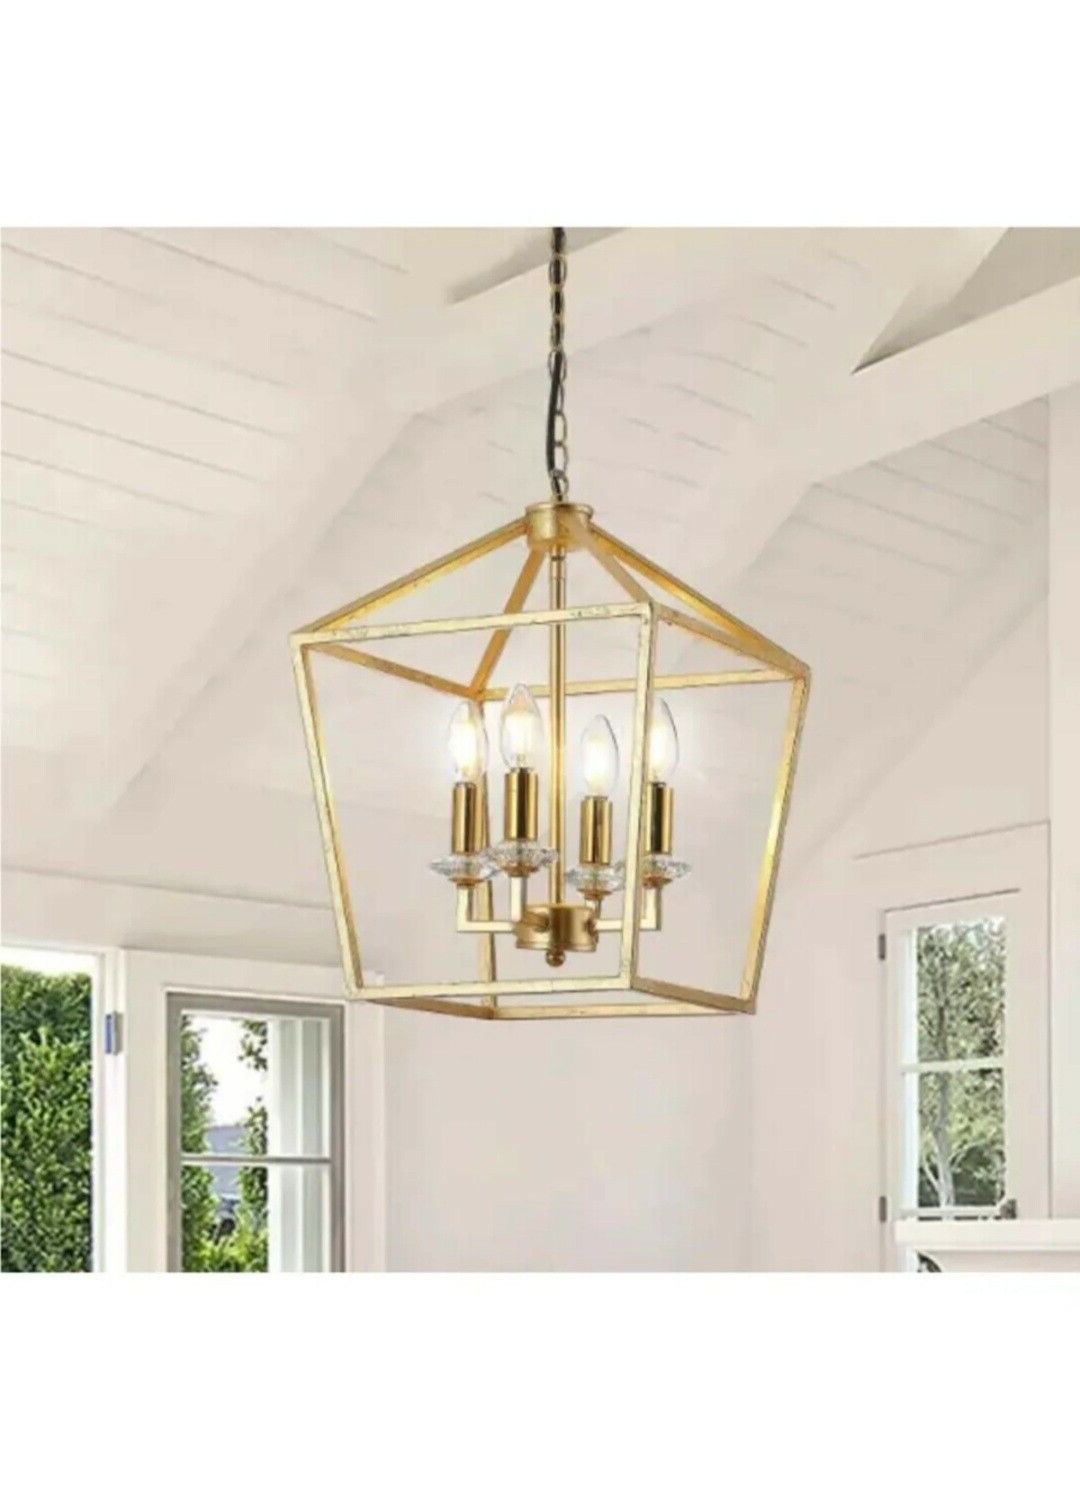 Ebay Pertaining To White Gold Lantern Chandeliers (View 11 of 15)